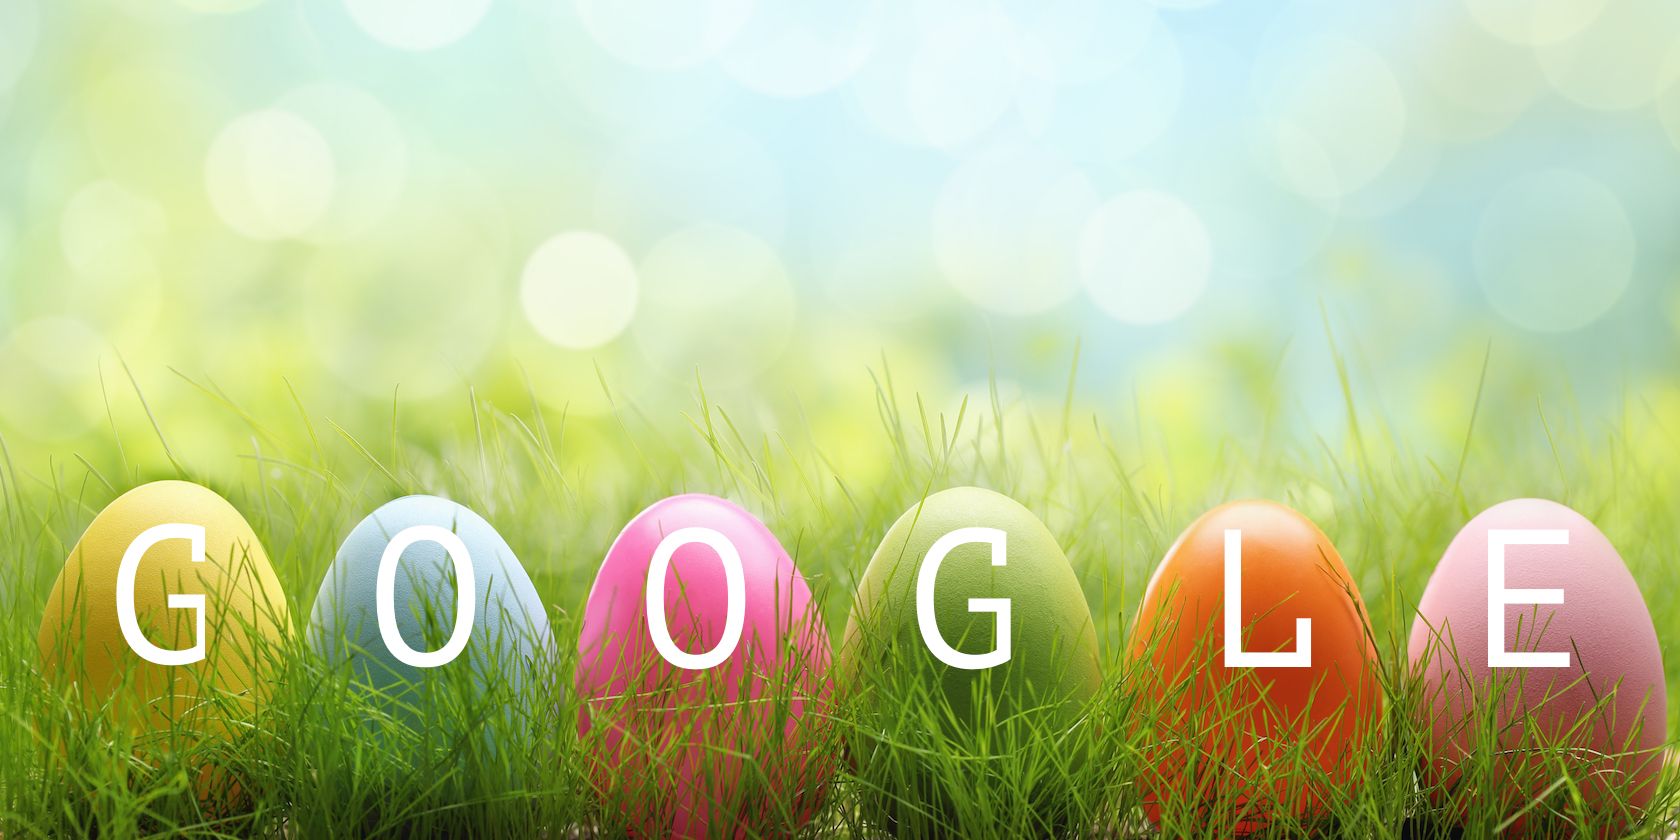 3 Google Search Easter Eggs You Didn’t Know About